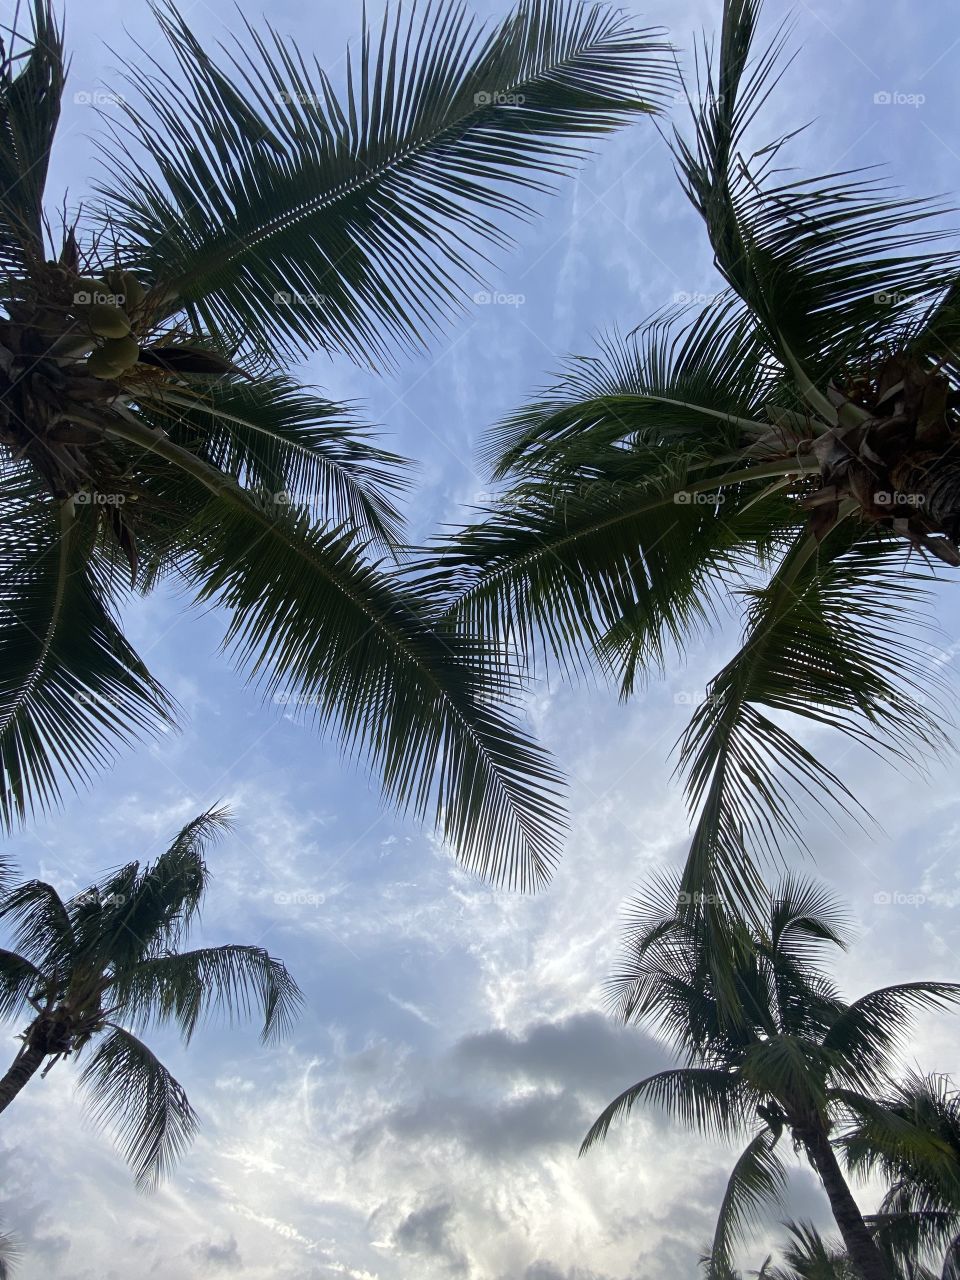 Sky and palm trees 